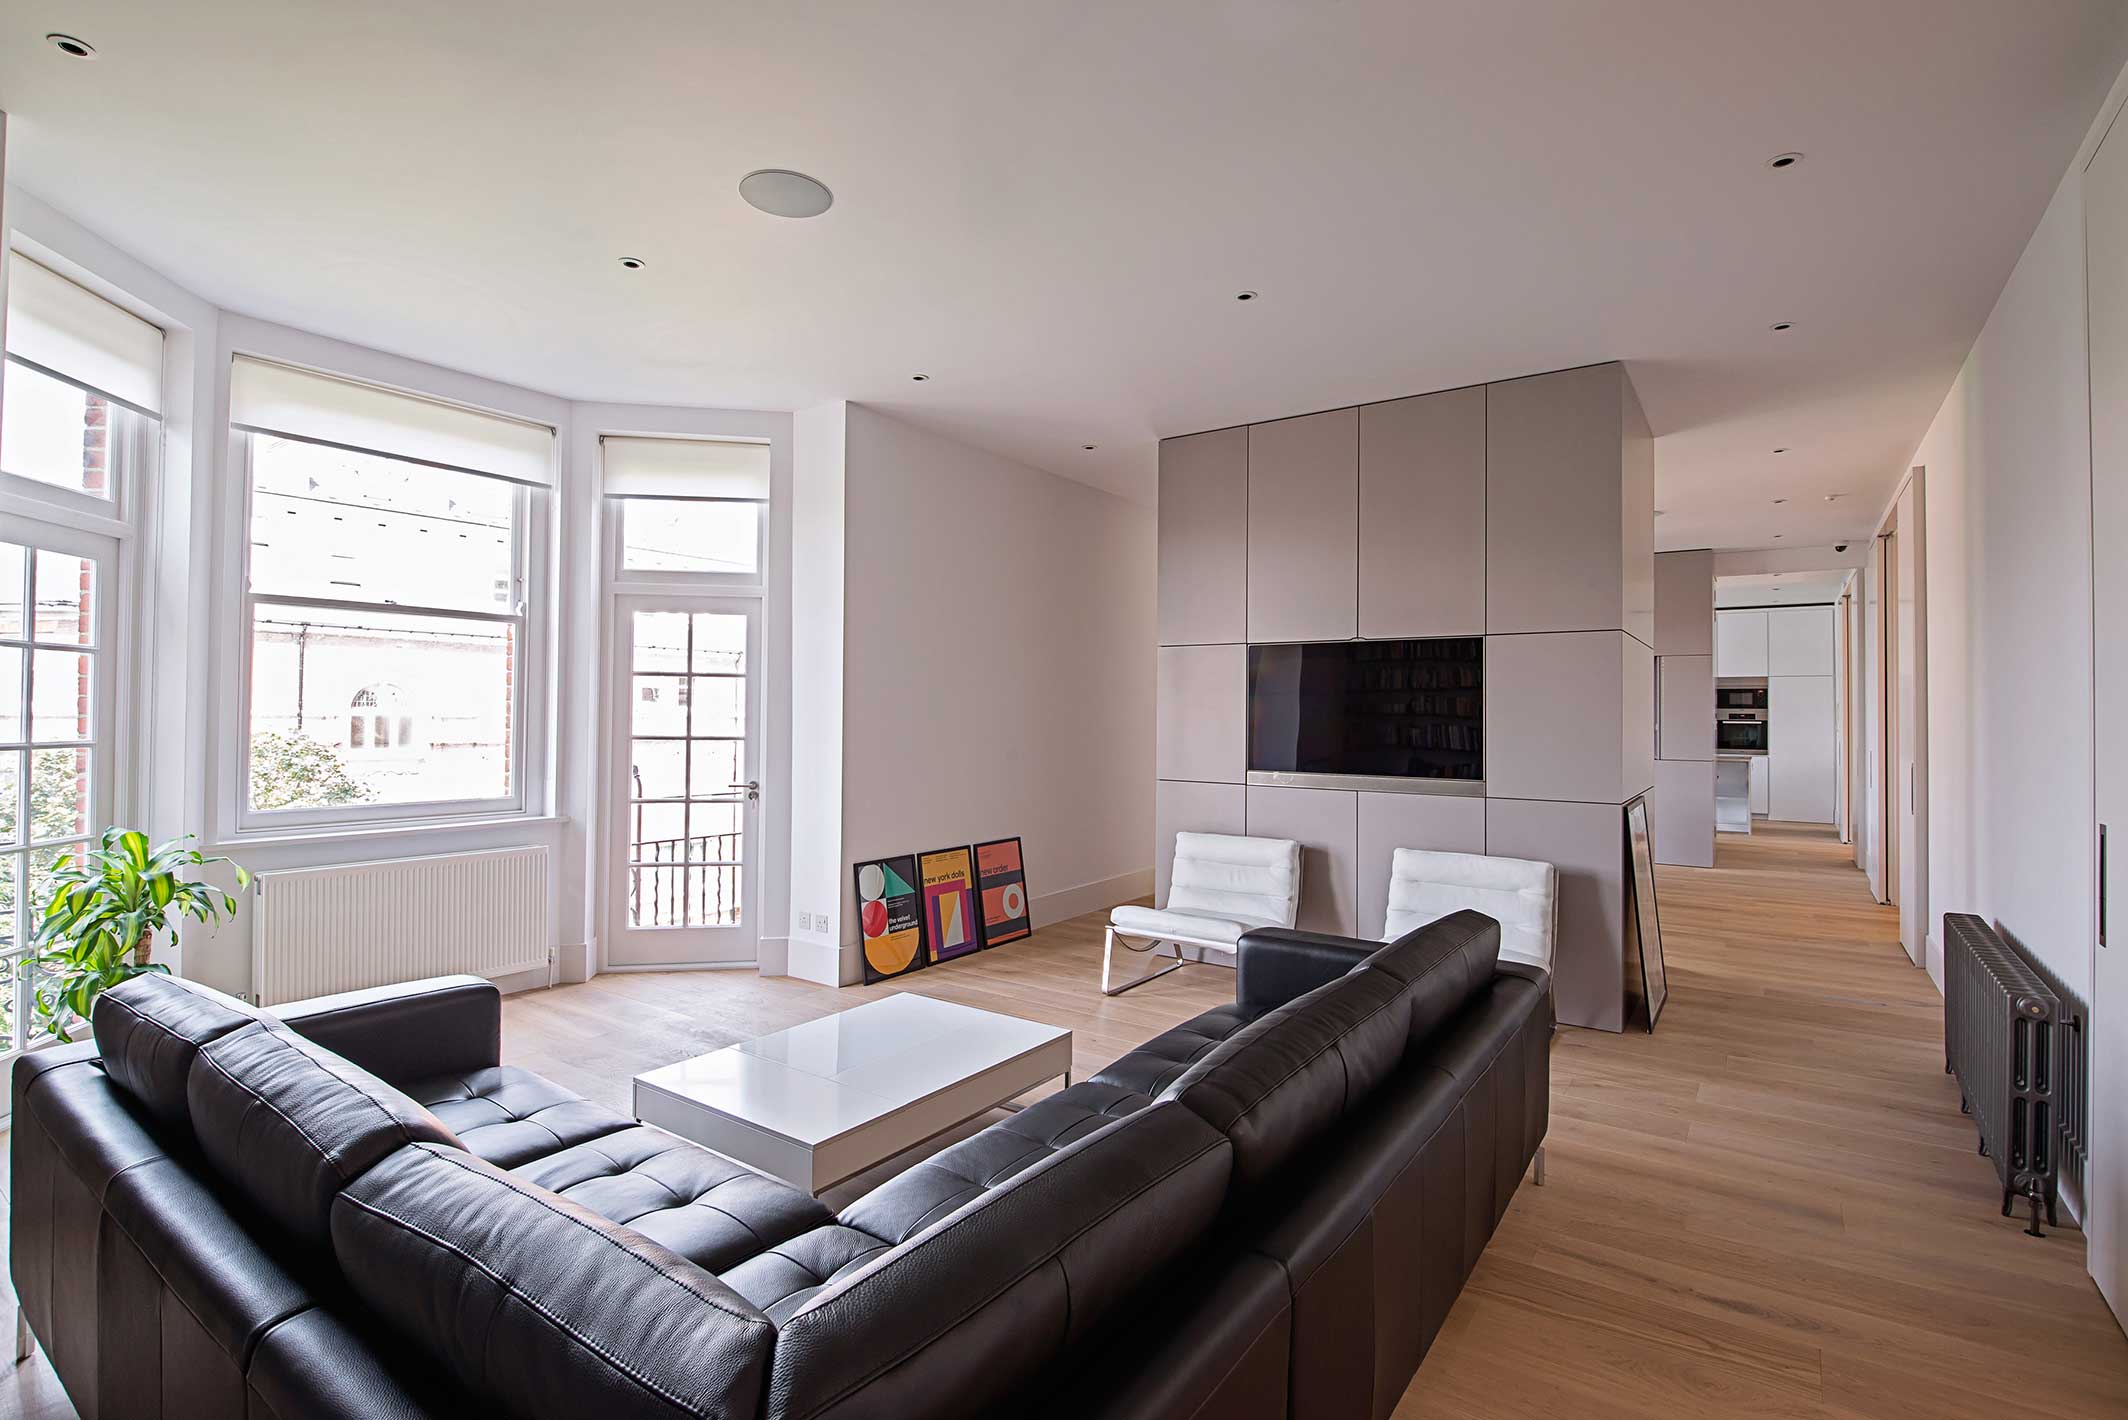 Hampstead Apartment, North London - Designed by ATELIERwest Ltd. 1